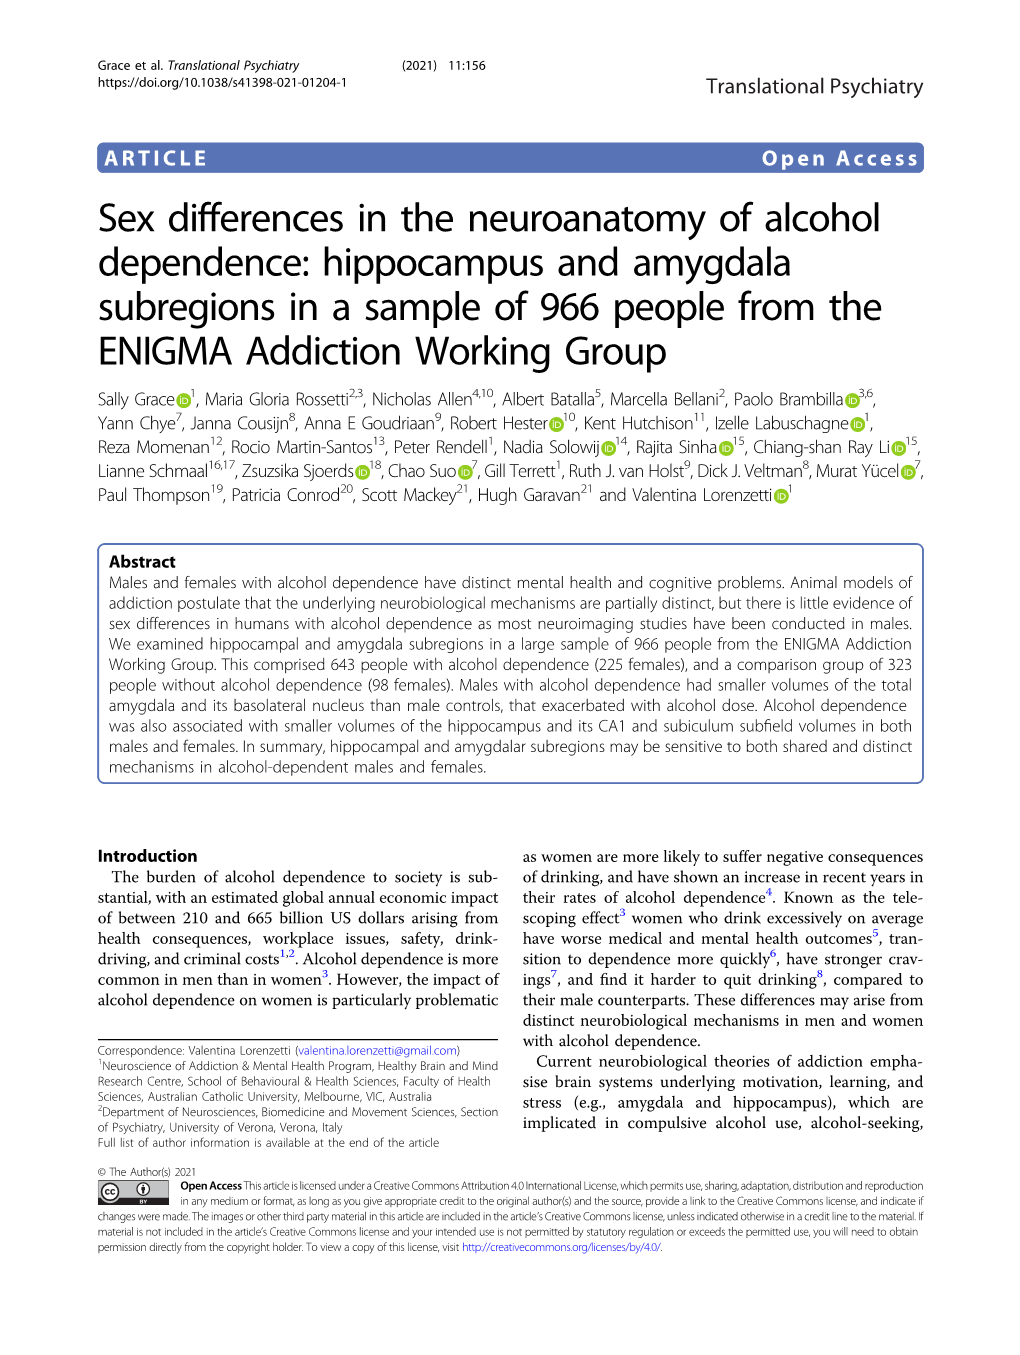 Sex Differences in the Neuroanatomy of Alcohol Dependence